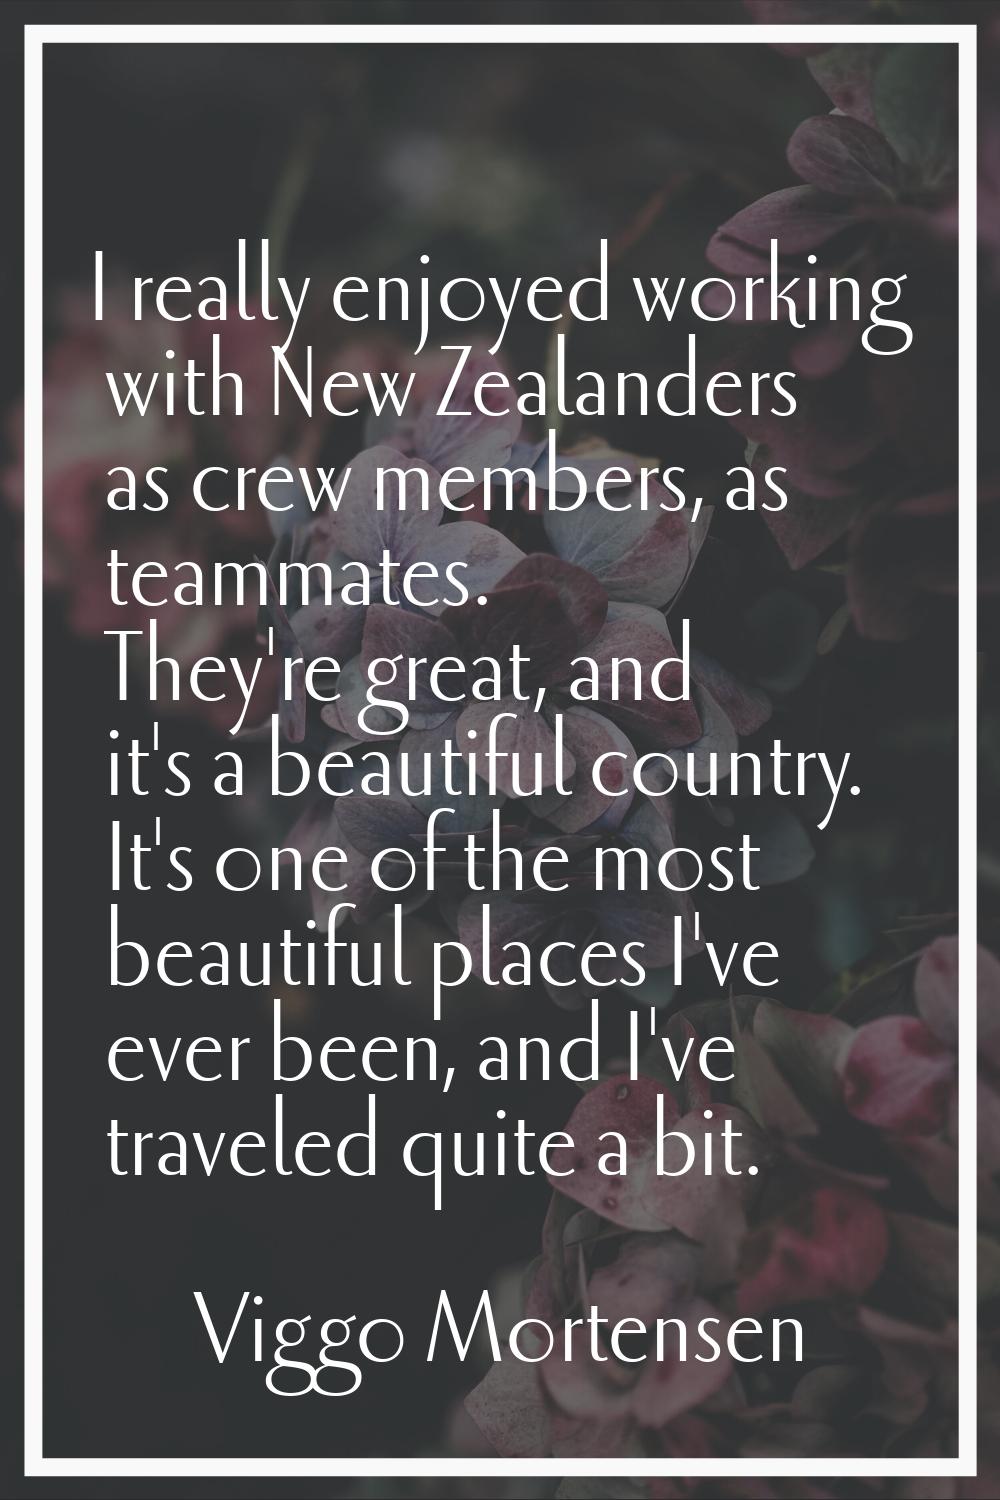 I really enjoyed working with New Zealanders as crew members, as teammates. They're great, and it's